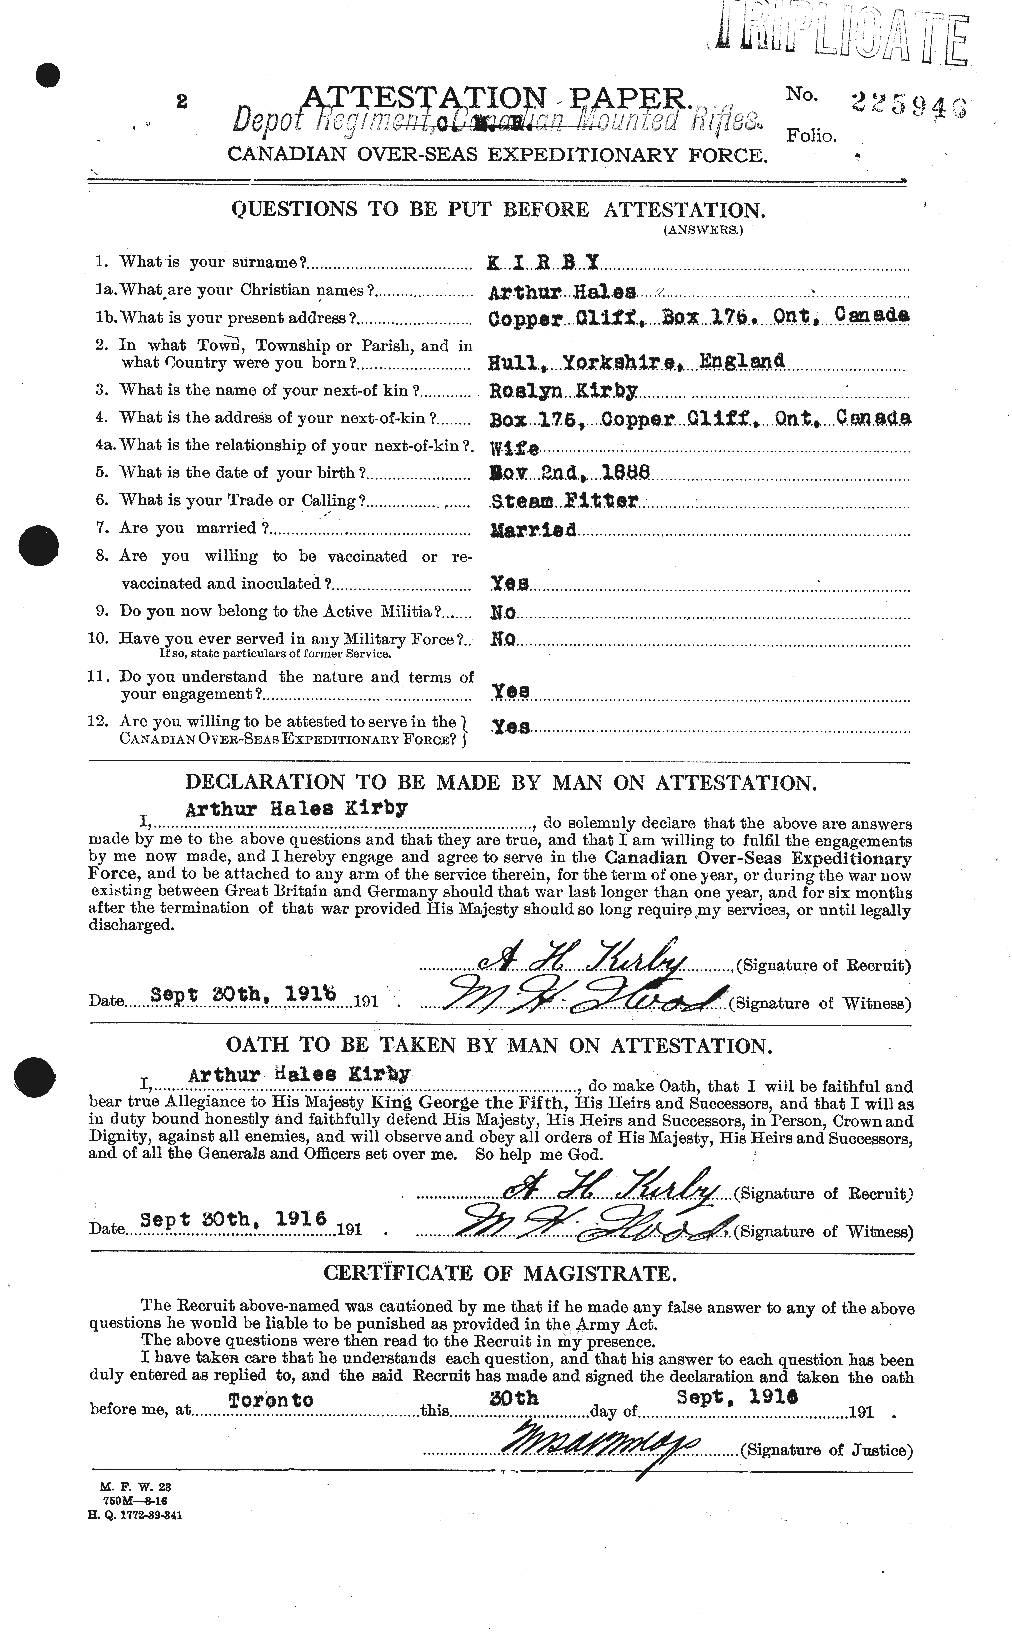 Personnel Records of the First World War - CEF 437156a